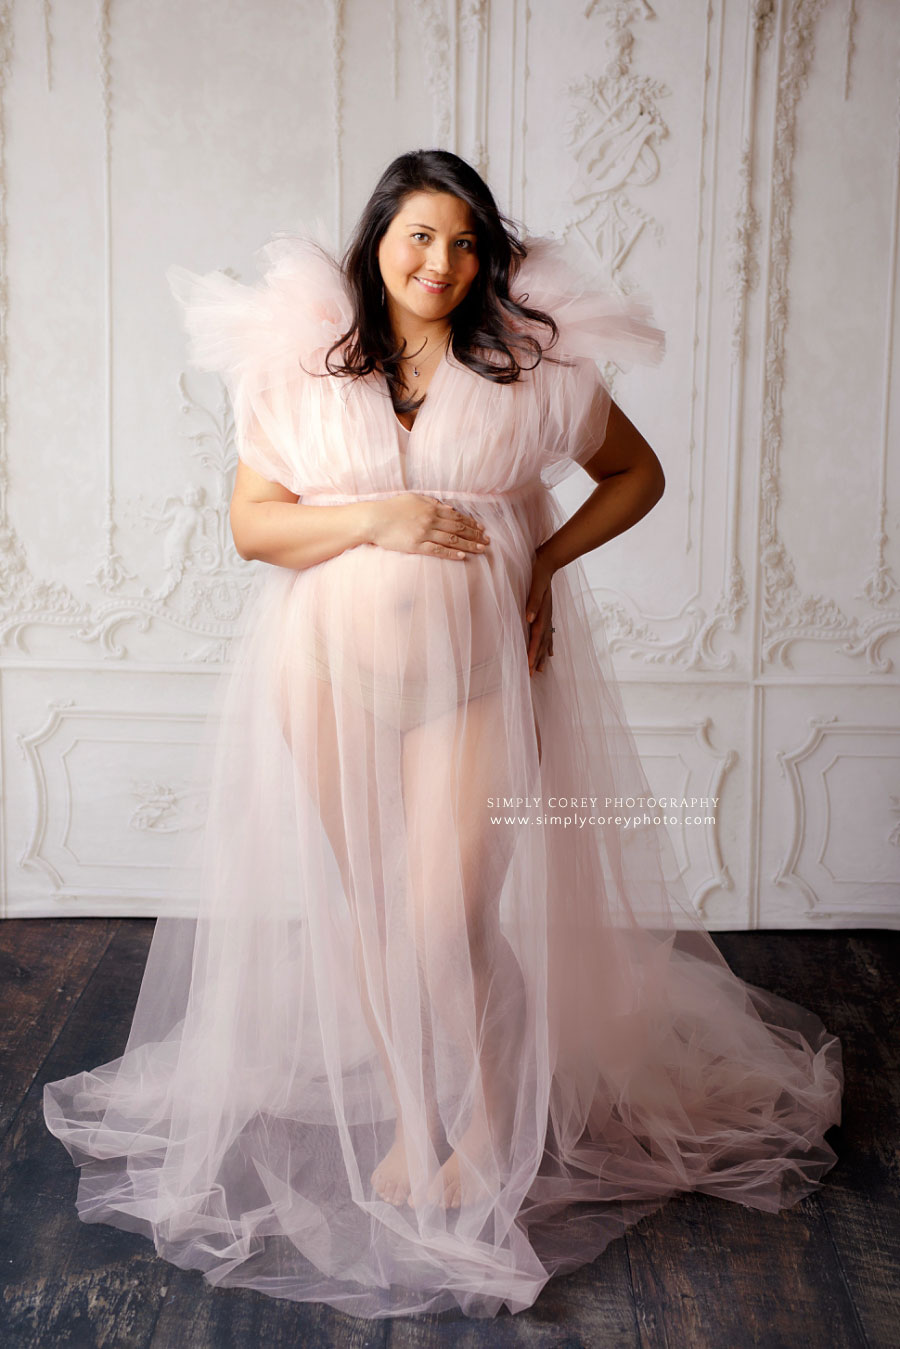 Peachtree City maternity photographer, studio maternity portrait in pink tulle dress